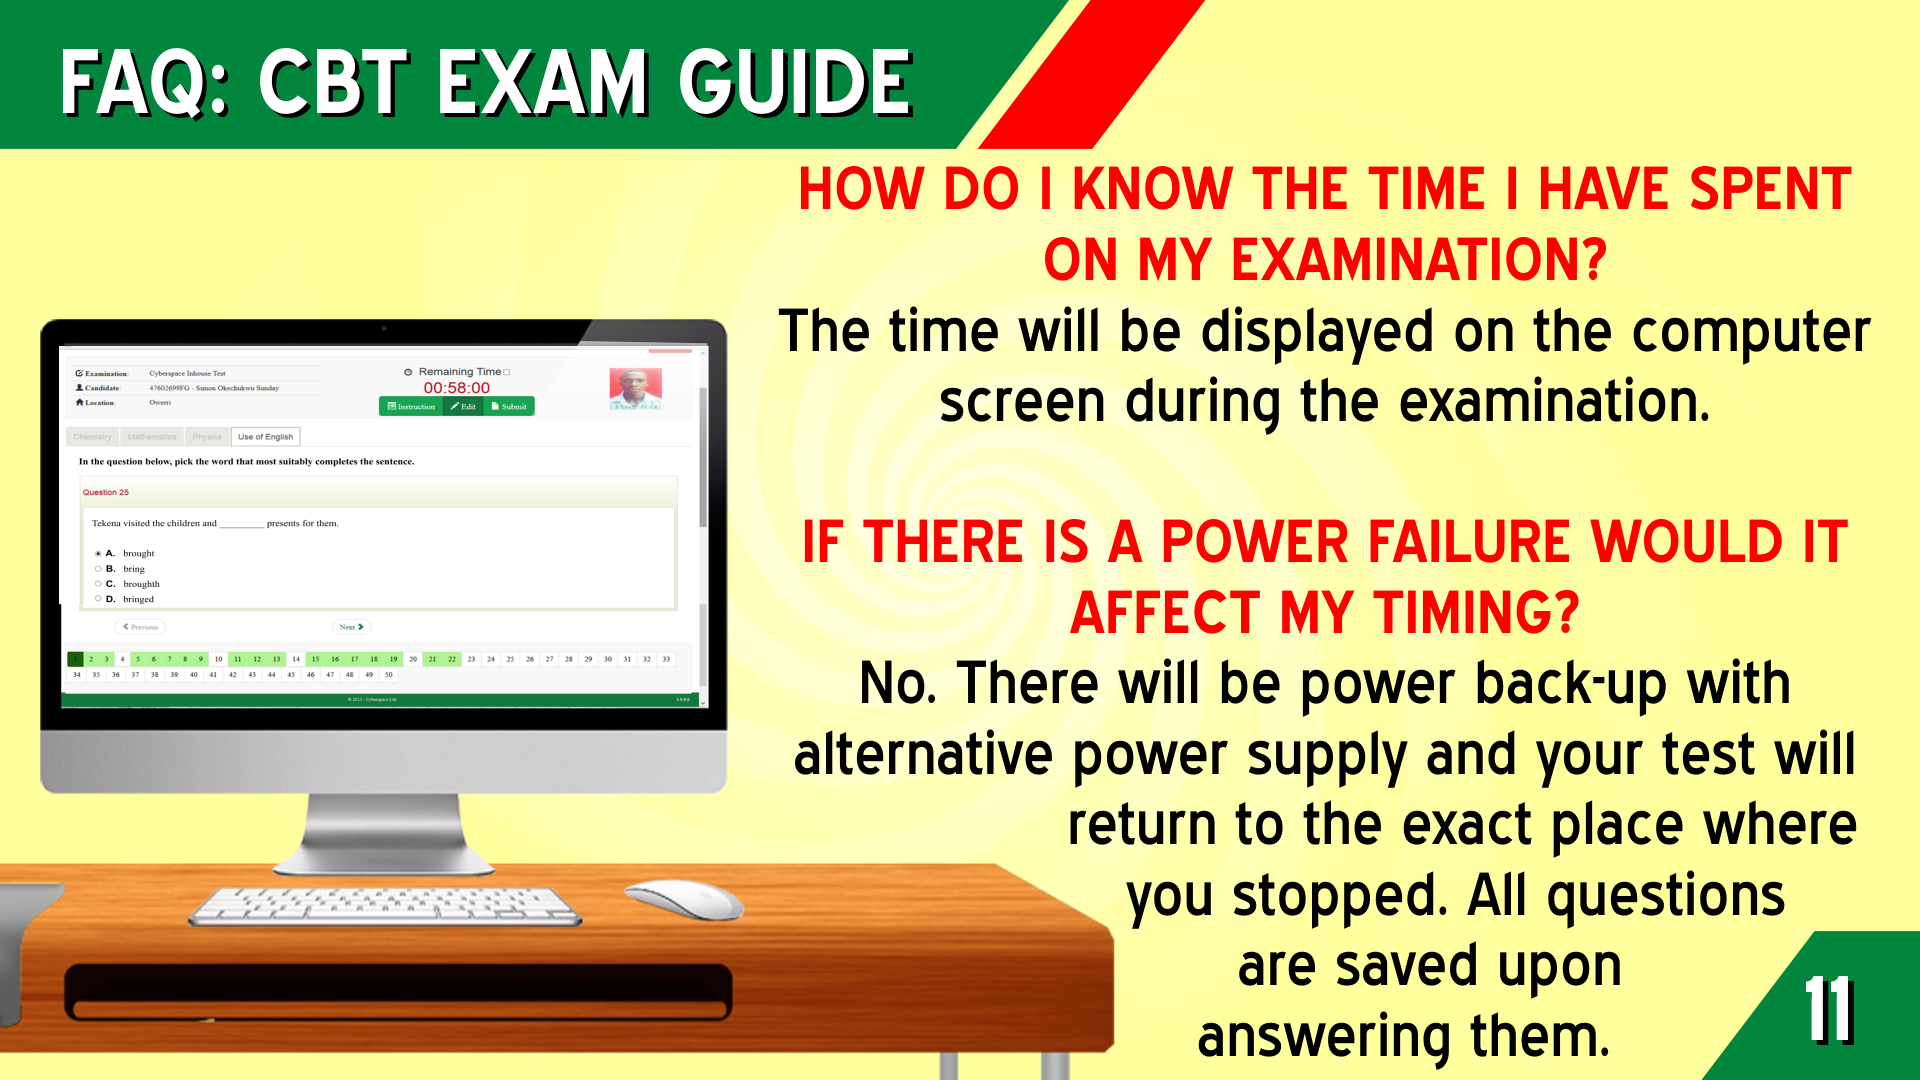 IF THERE IS A POWER FAILURE WOULD IT AFFECT MY TIMING?